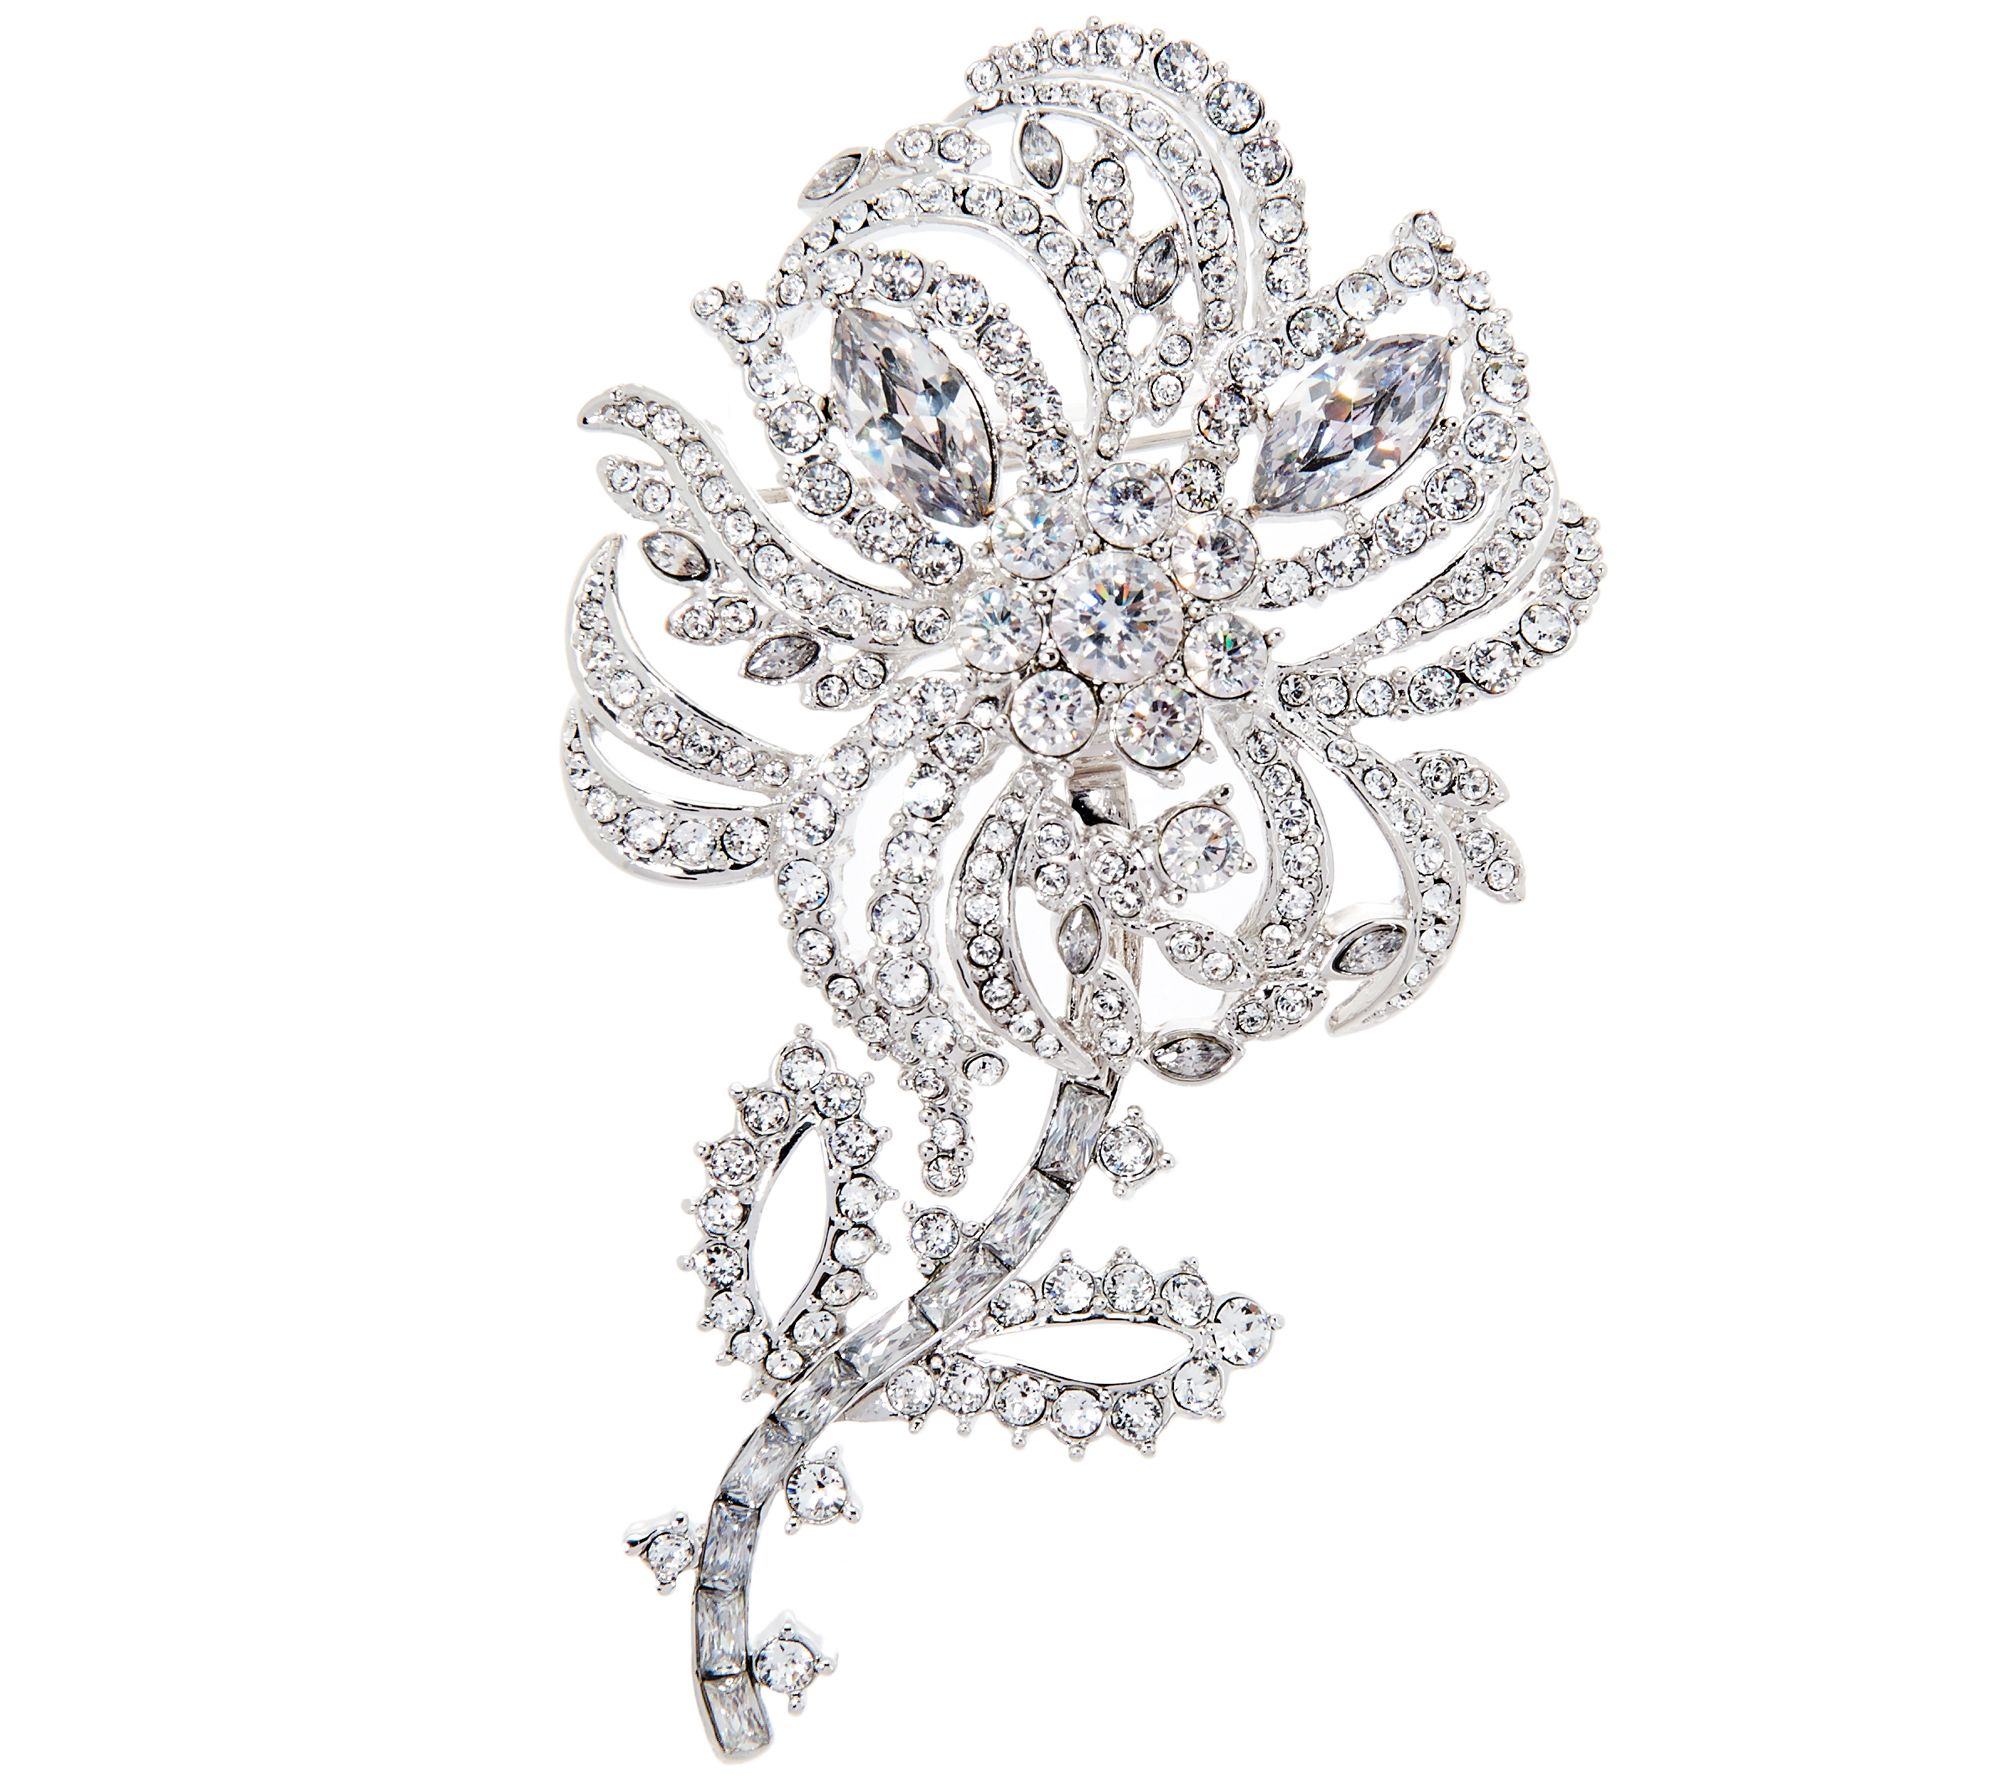 Joan Rivers Pave' Crystal Flower Brooch with Removable Stem - QVC.com